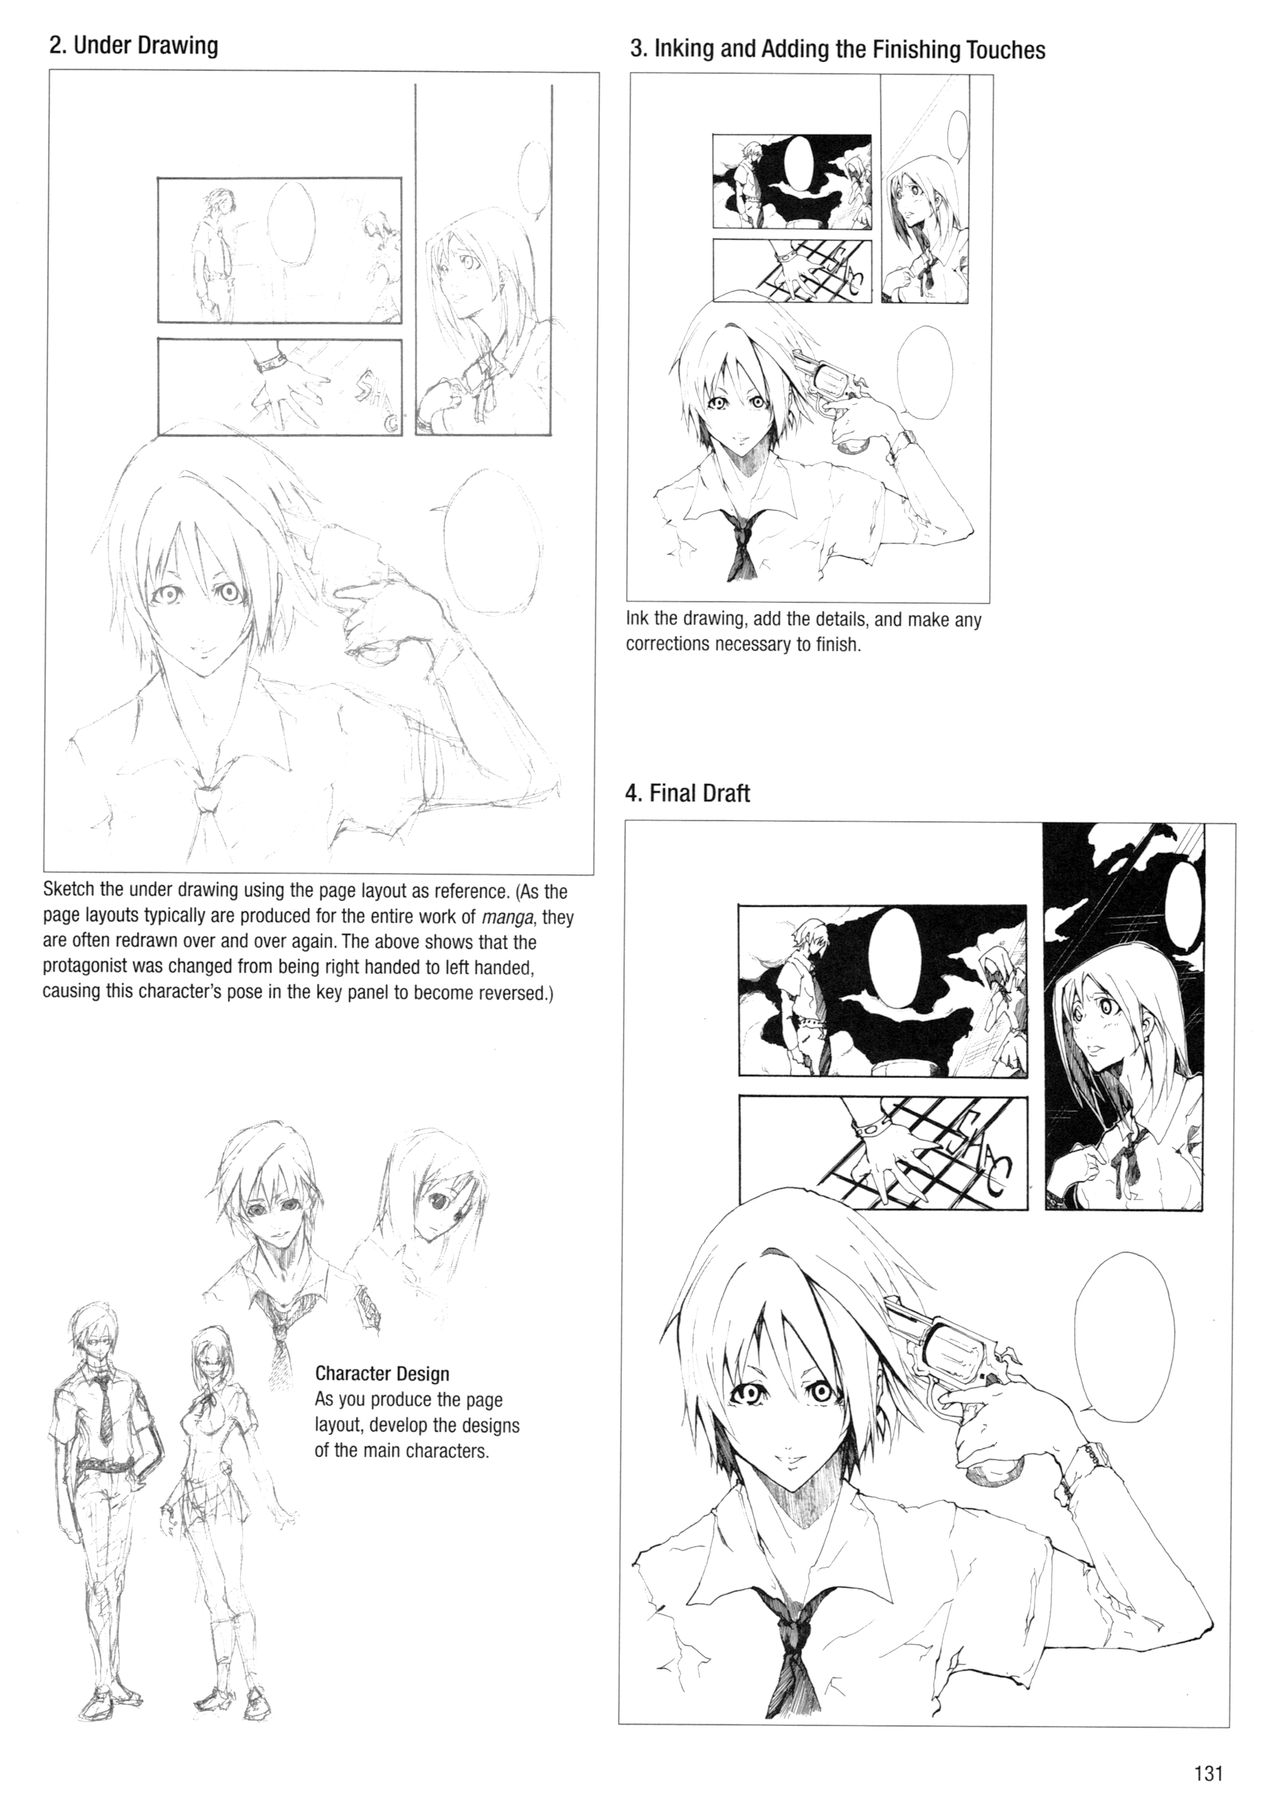 Sketching Manga-Style Vol. 3 - Unforgettable Characters 130